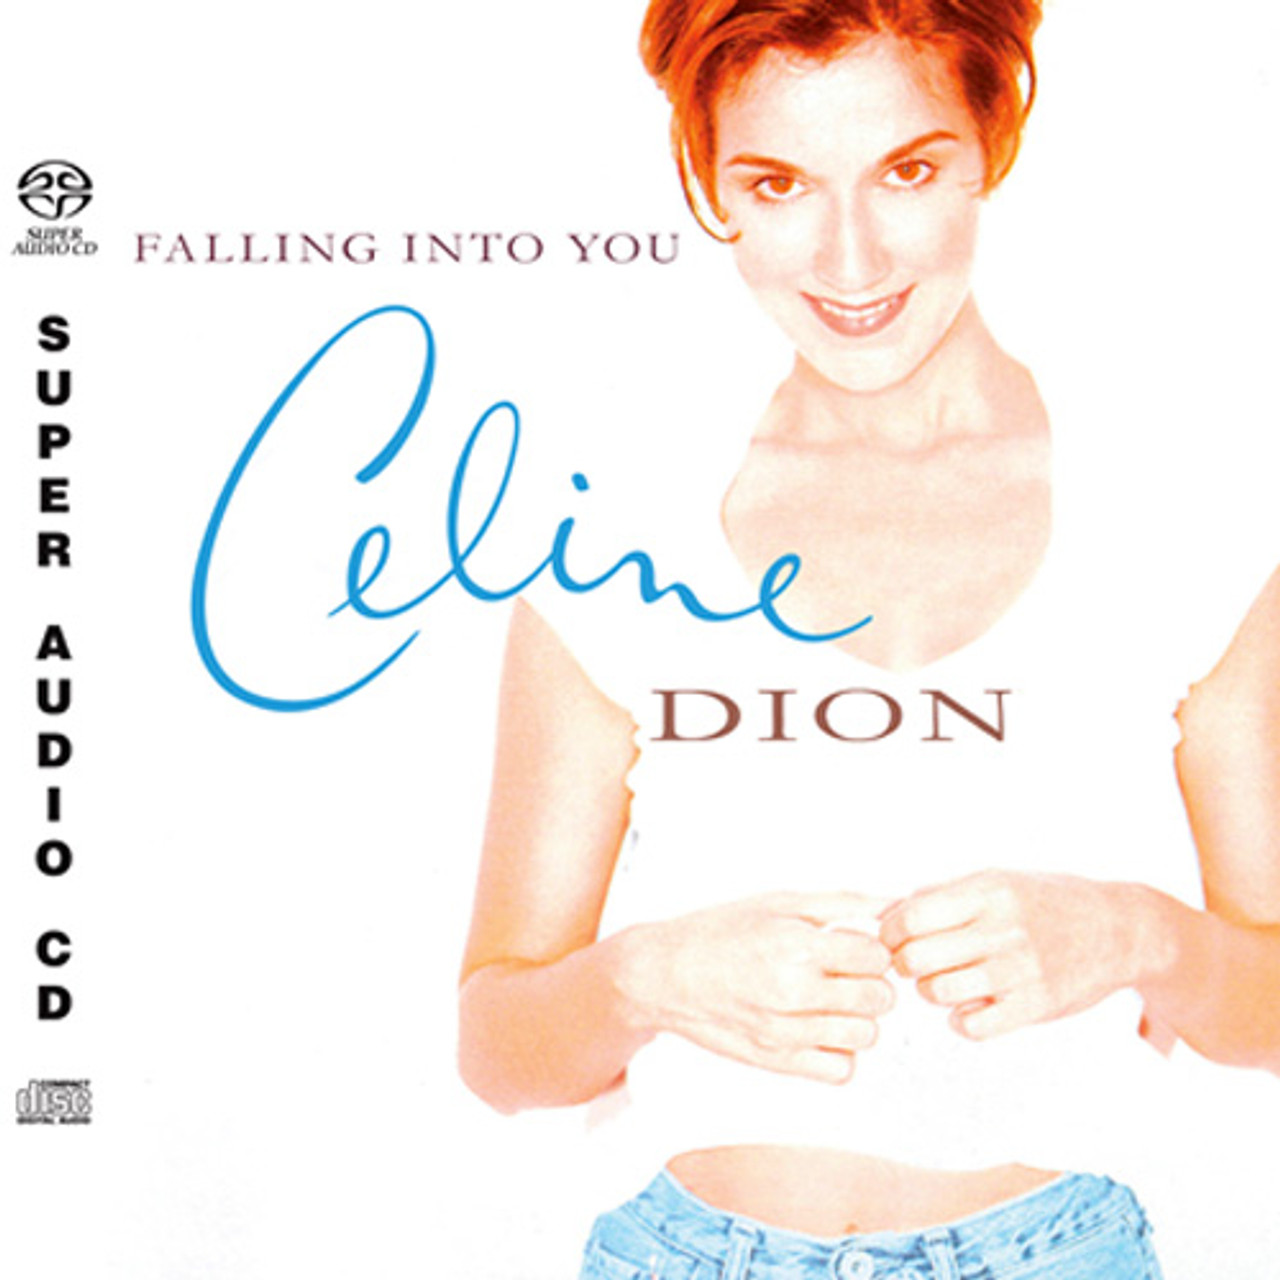 Celine Dion Falling Into You Hybrid Stereo Import SACD